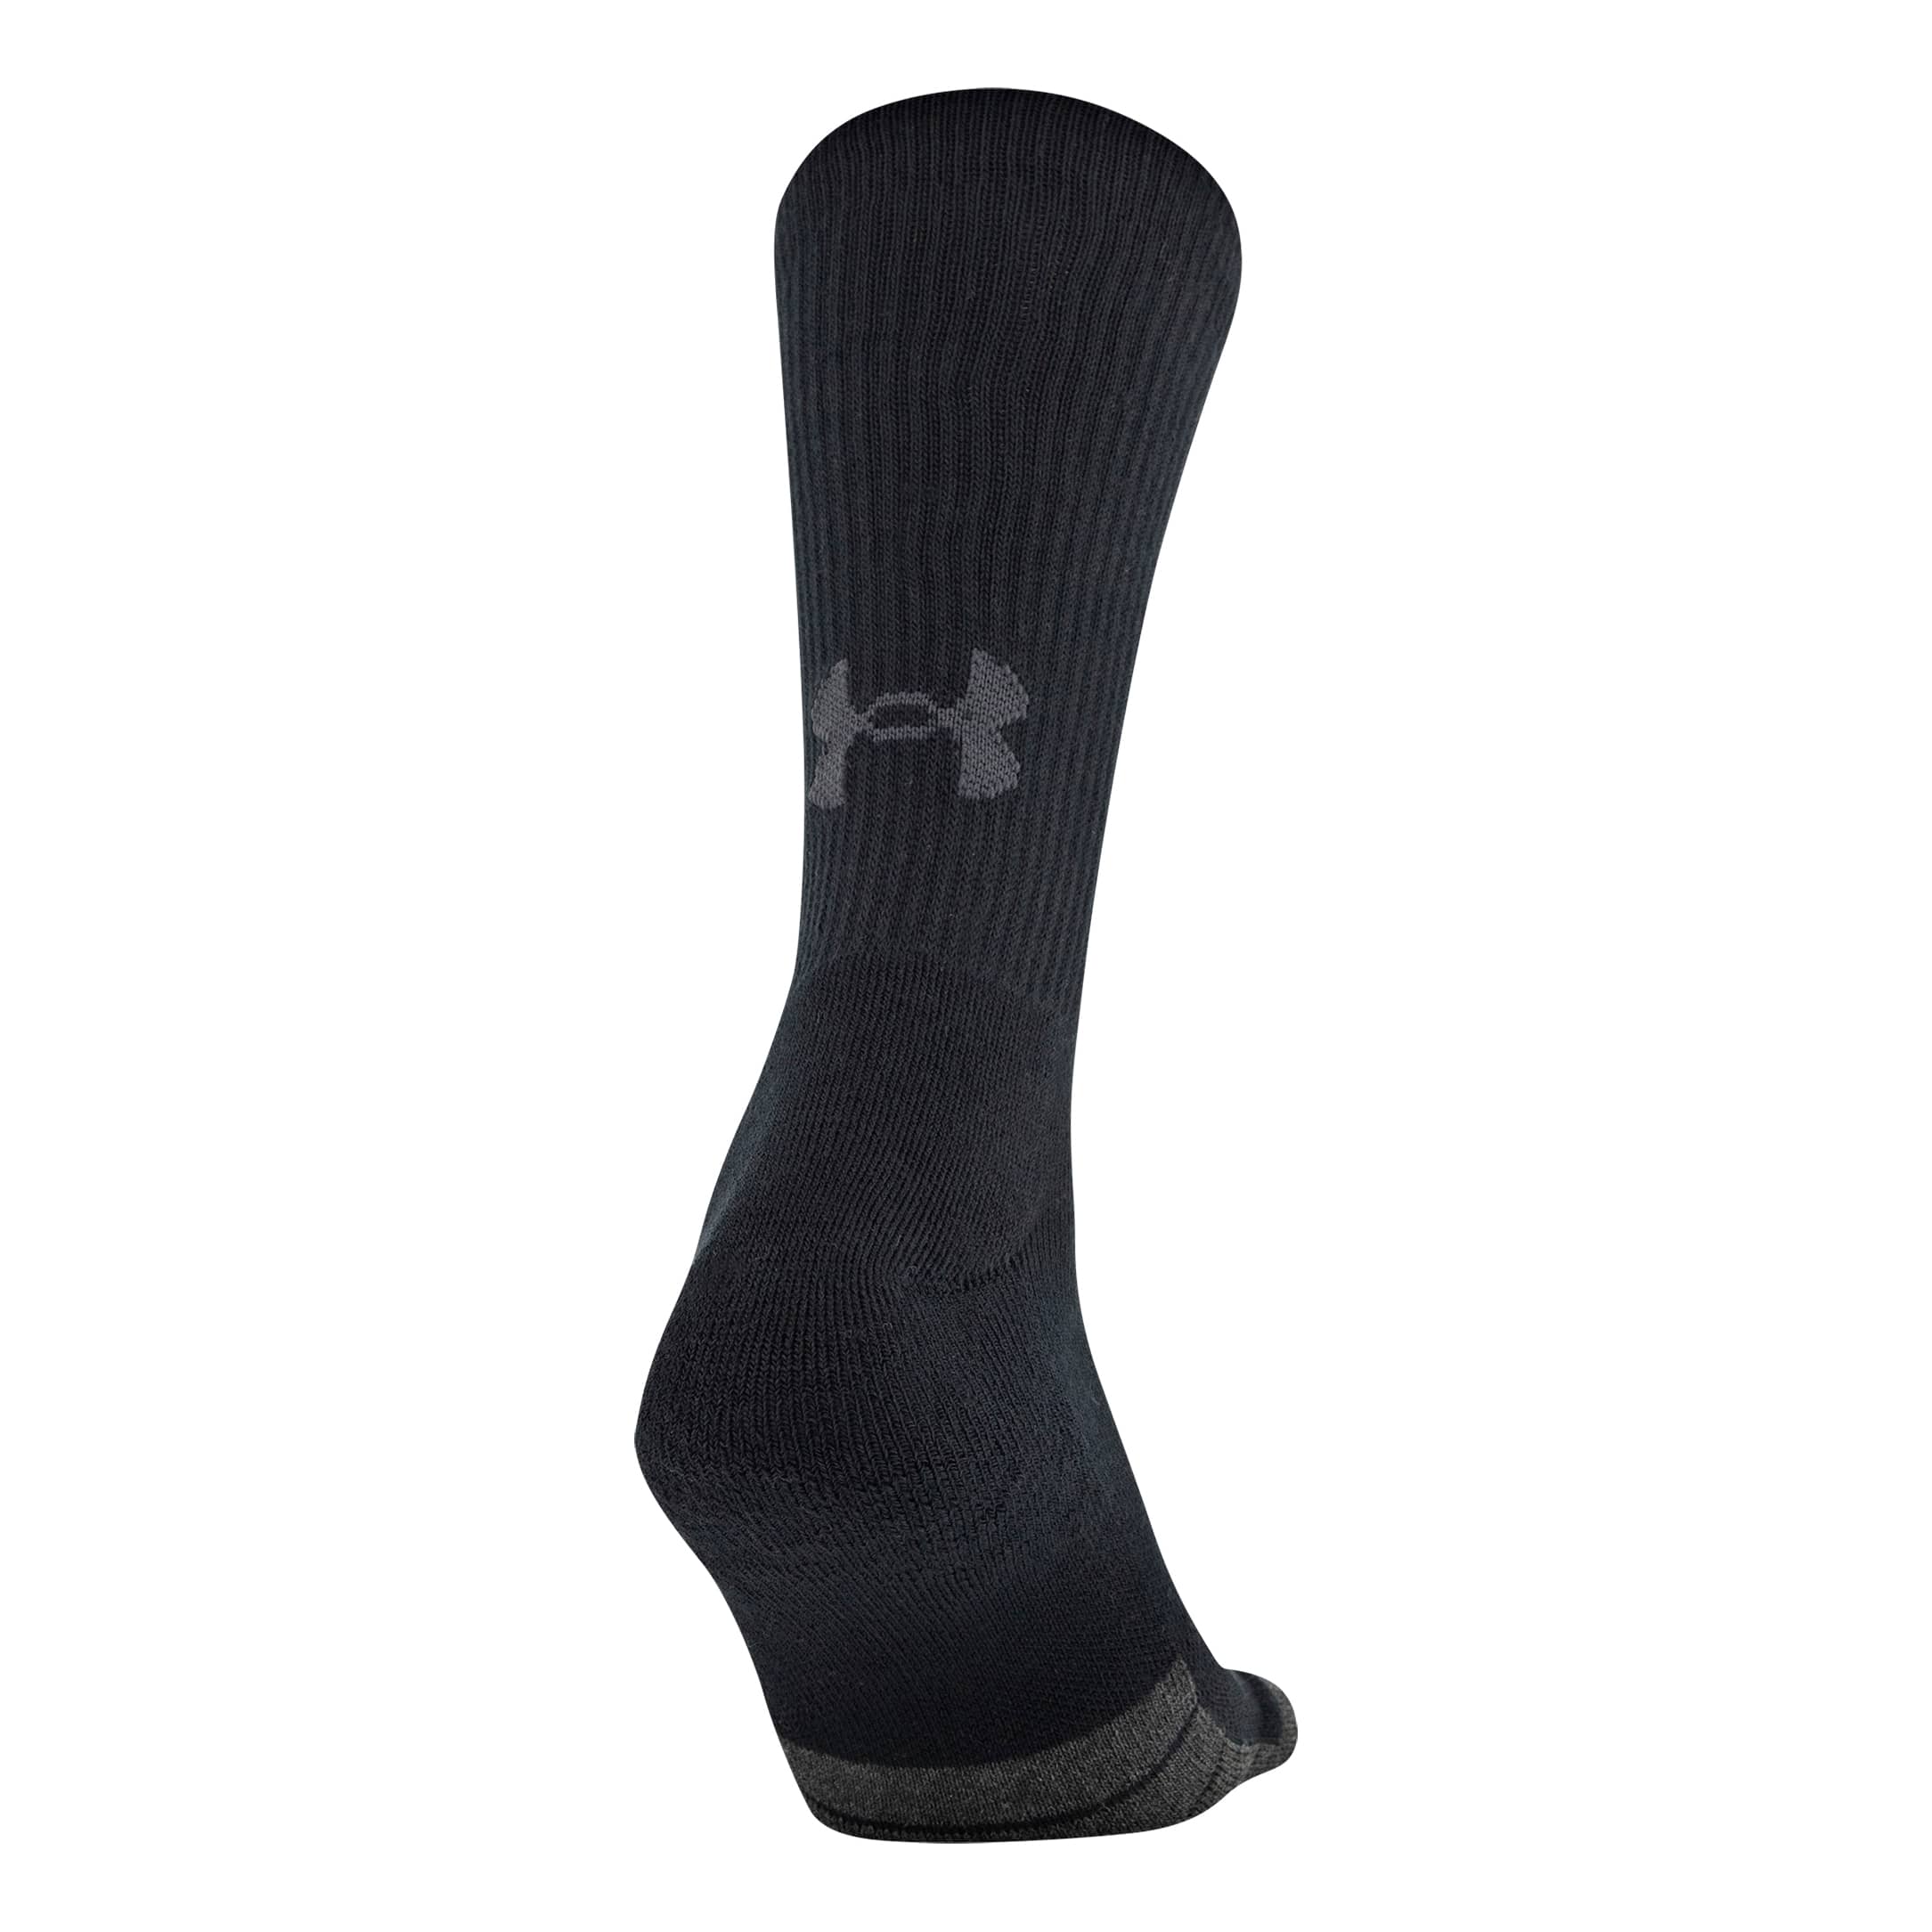 Under Armour® Men's Elevated Novelty Crew Sock